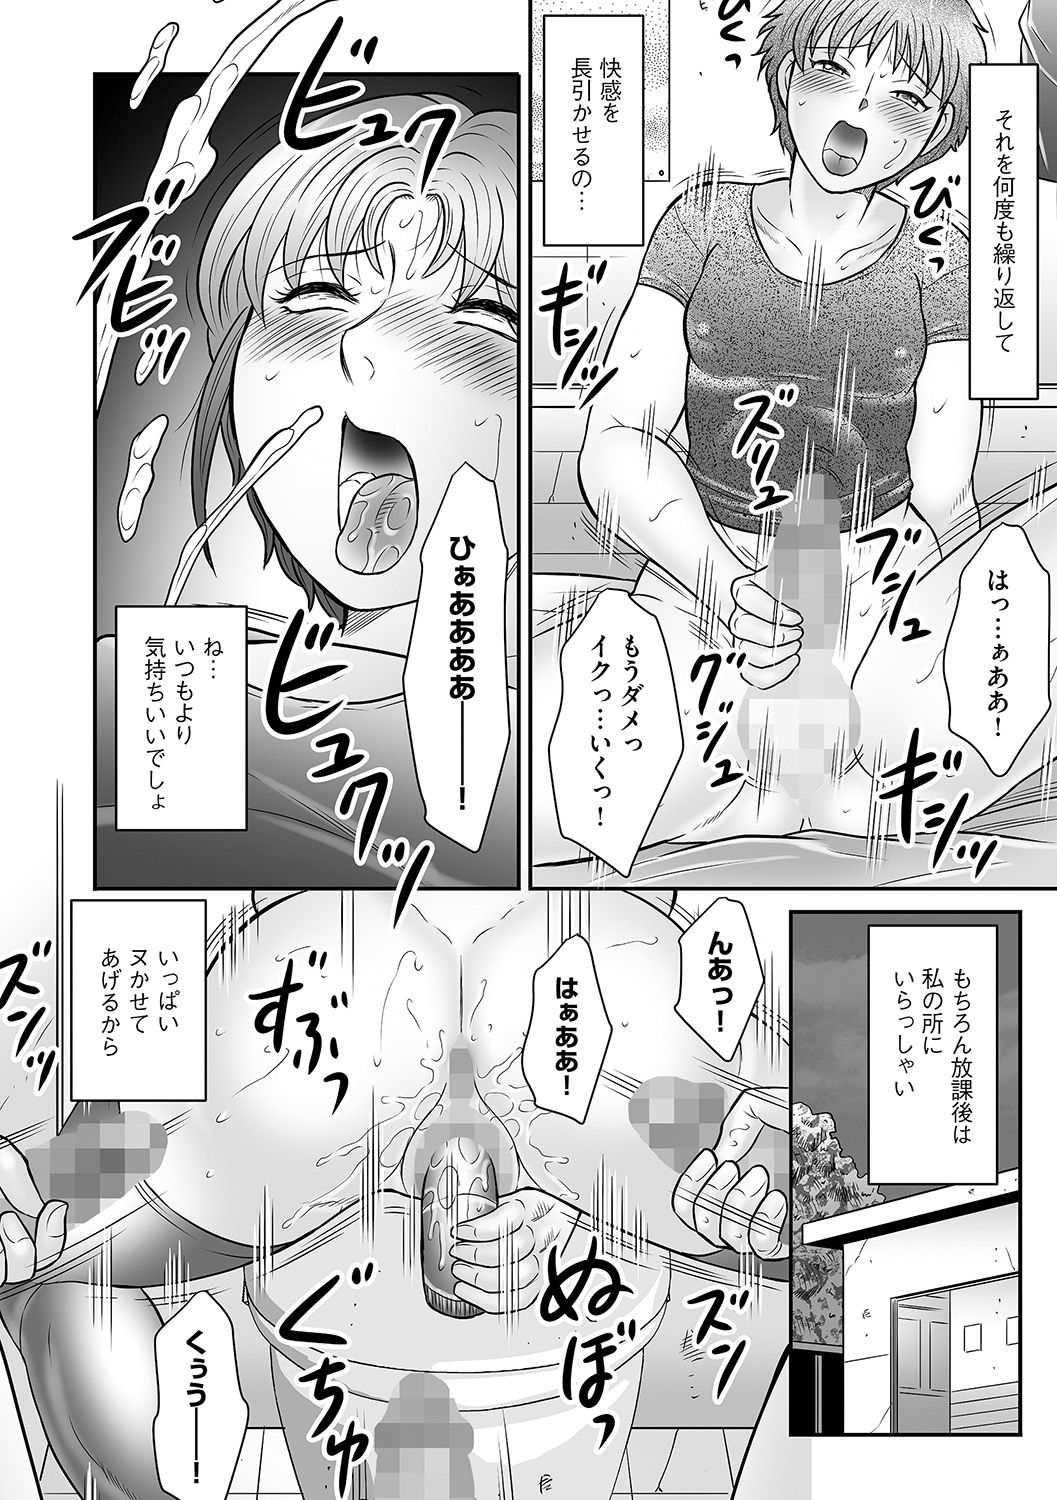 [Fuusen Club] Boshi no Susume - The advice of the mother and child Ch. 15 (Magazine Cyberia Vol. 74) [Digital] [風船クラブ] 母子のすすめ 第15話 (マガジンサイベリア Vol.74) [DL版]